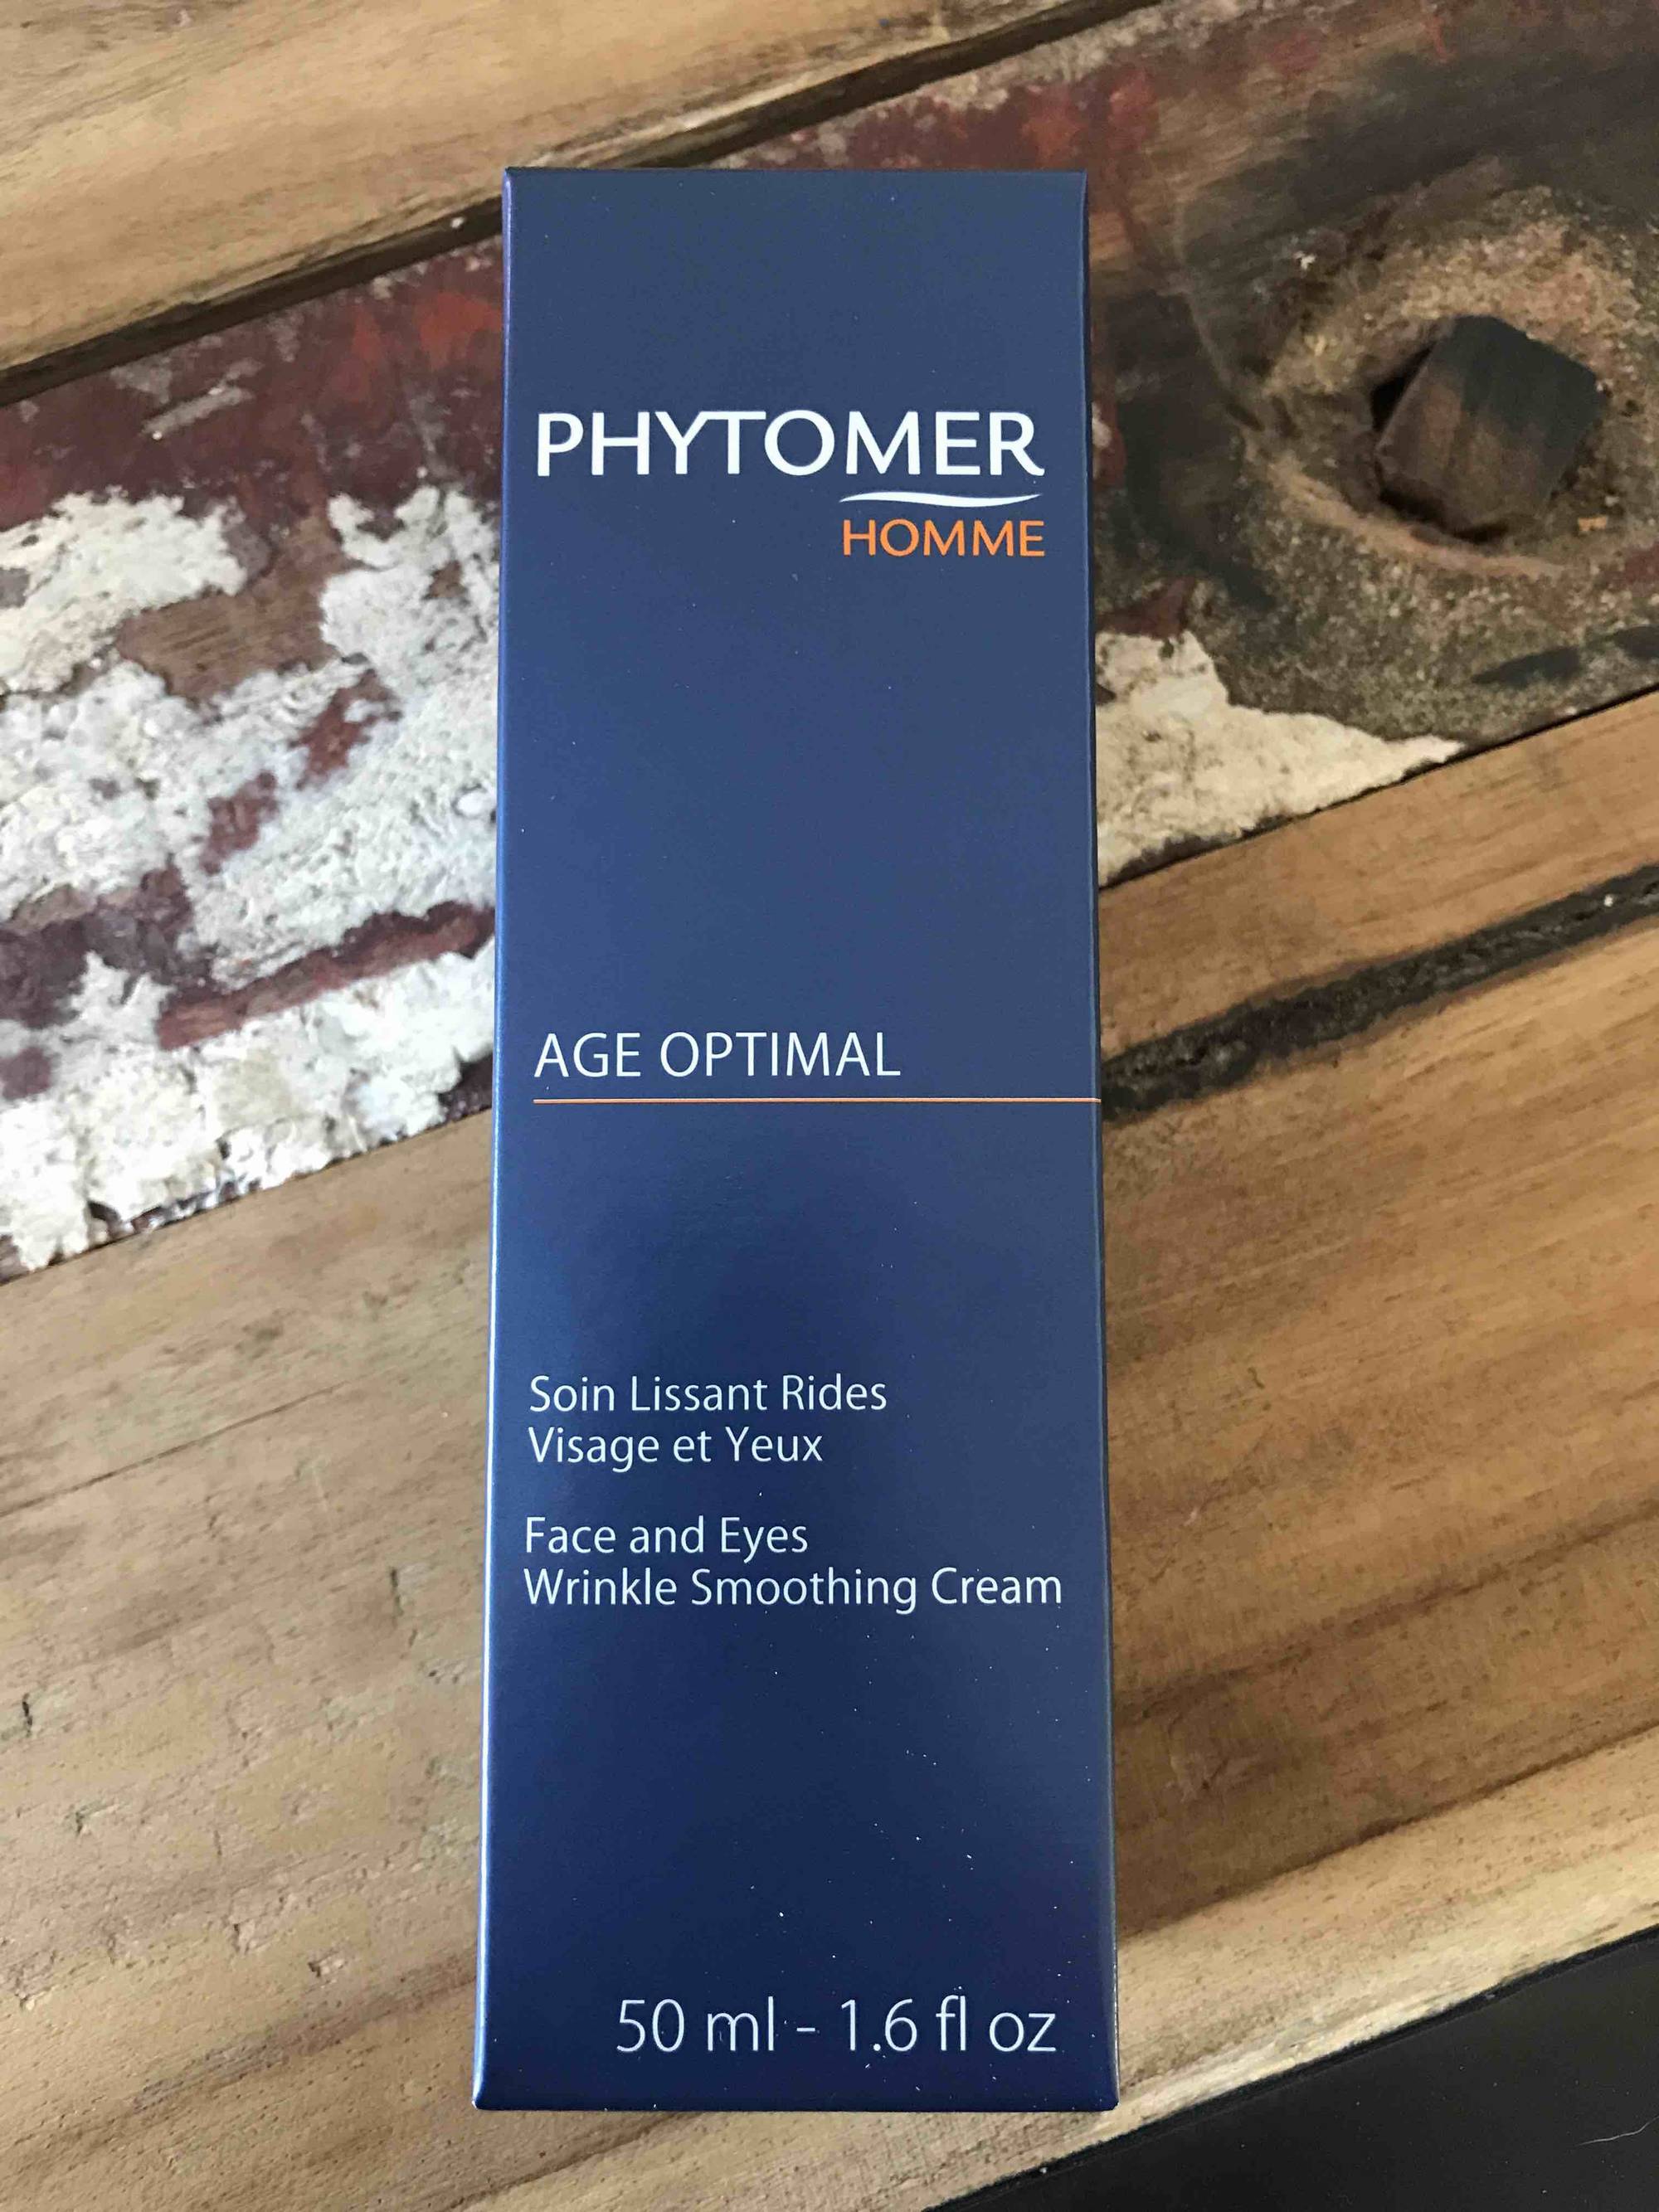 PHYTOMER - Age optimal homme - Soin lissant rides visage et yeux